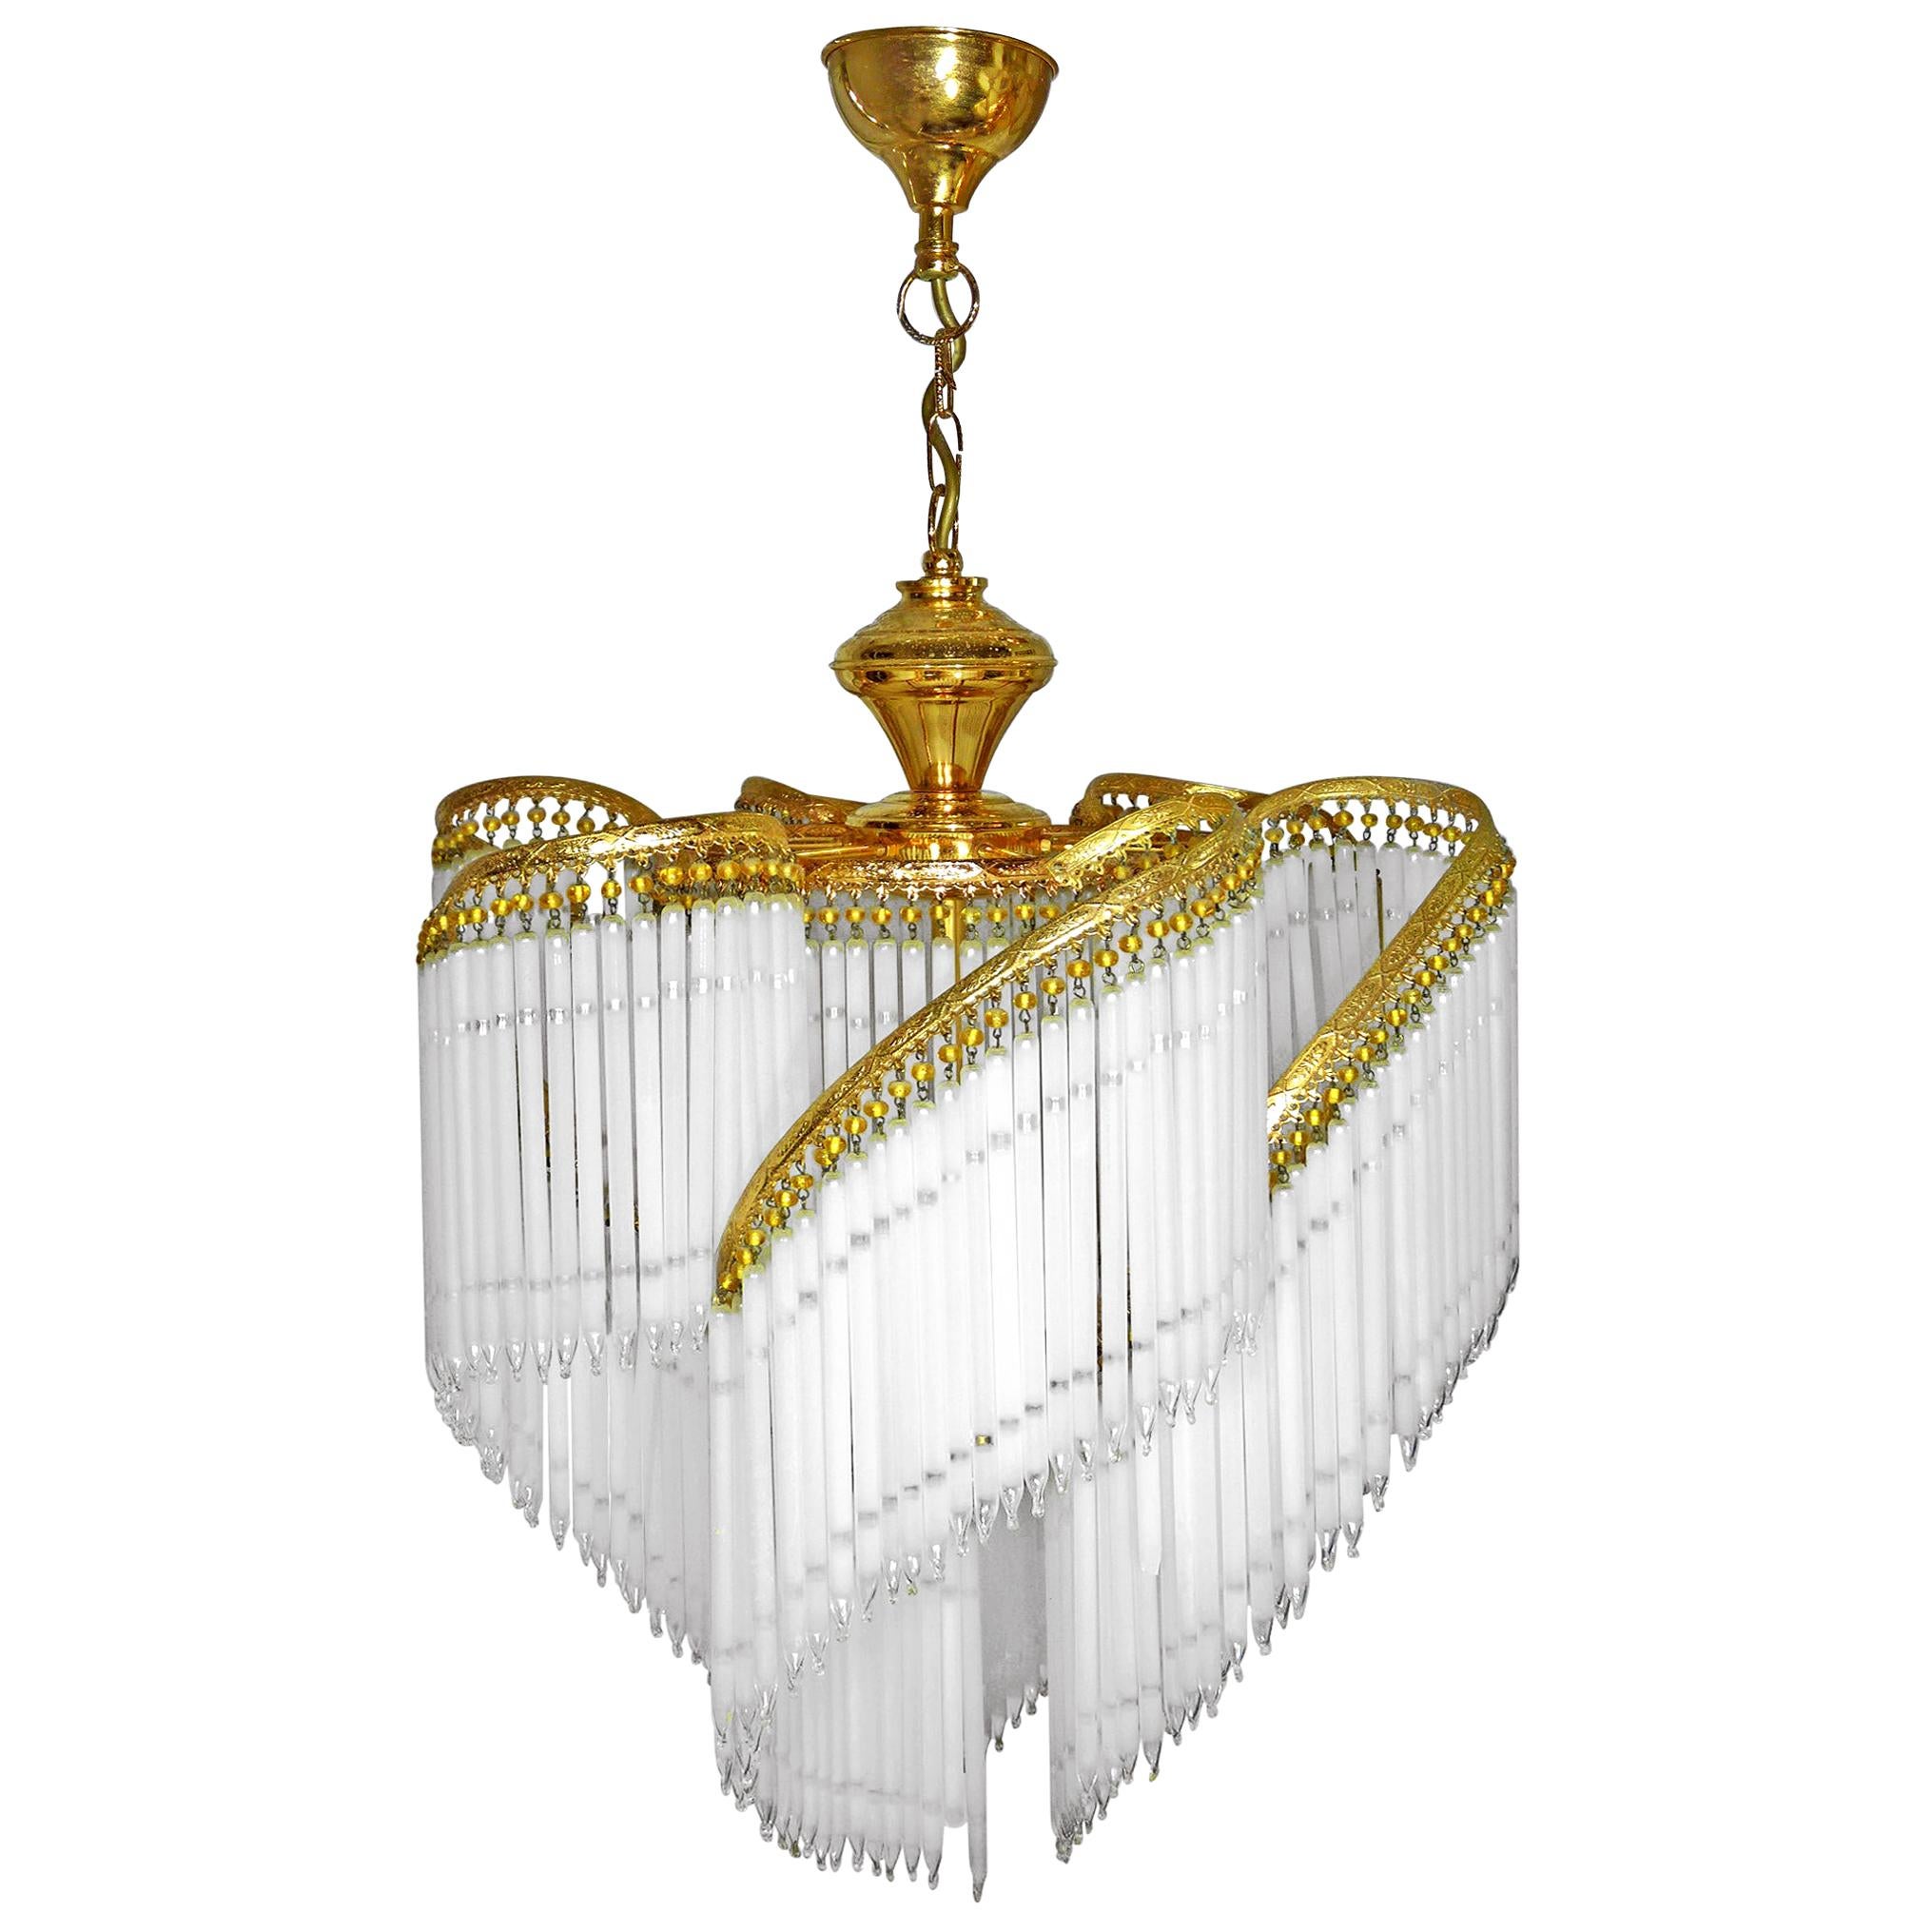 Fabulous midcentury Art Deco or Art Nouveau frosted and clear crystal glass fringe gilt spiral chandelier.
Measures:
Diameter 20 in/ 50 cm
Height 36 in/ 90 cm
Weight: 7 lb/ 6 Kg
Three light bulbs E14/ Good working condition
Assembly required.